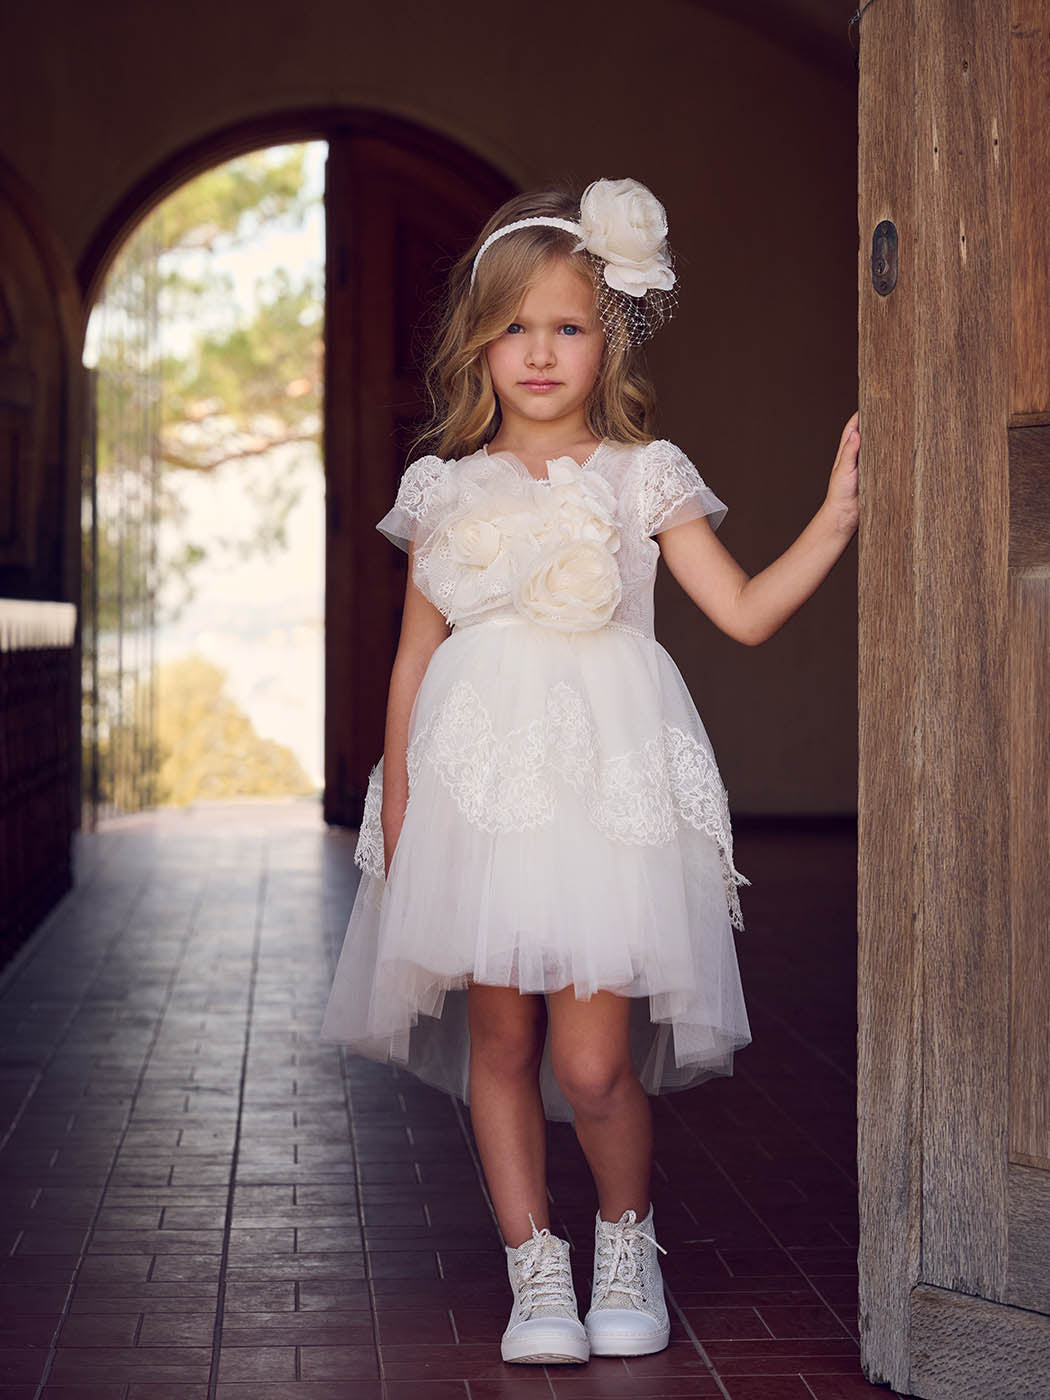 Baptism dress with French cord lace-CREAM FRESH